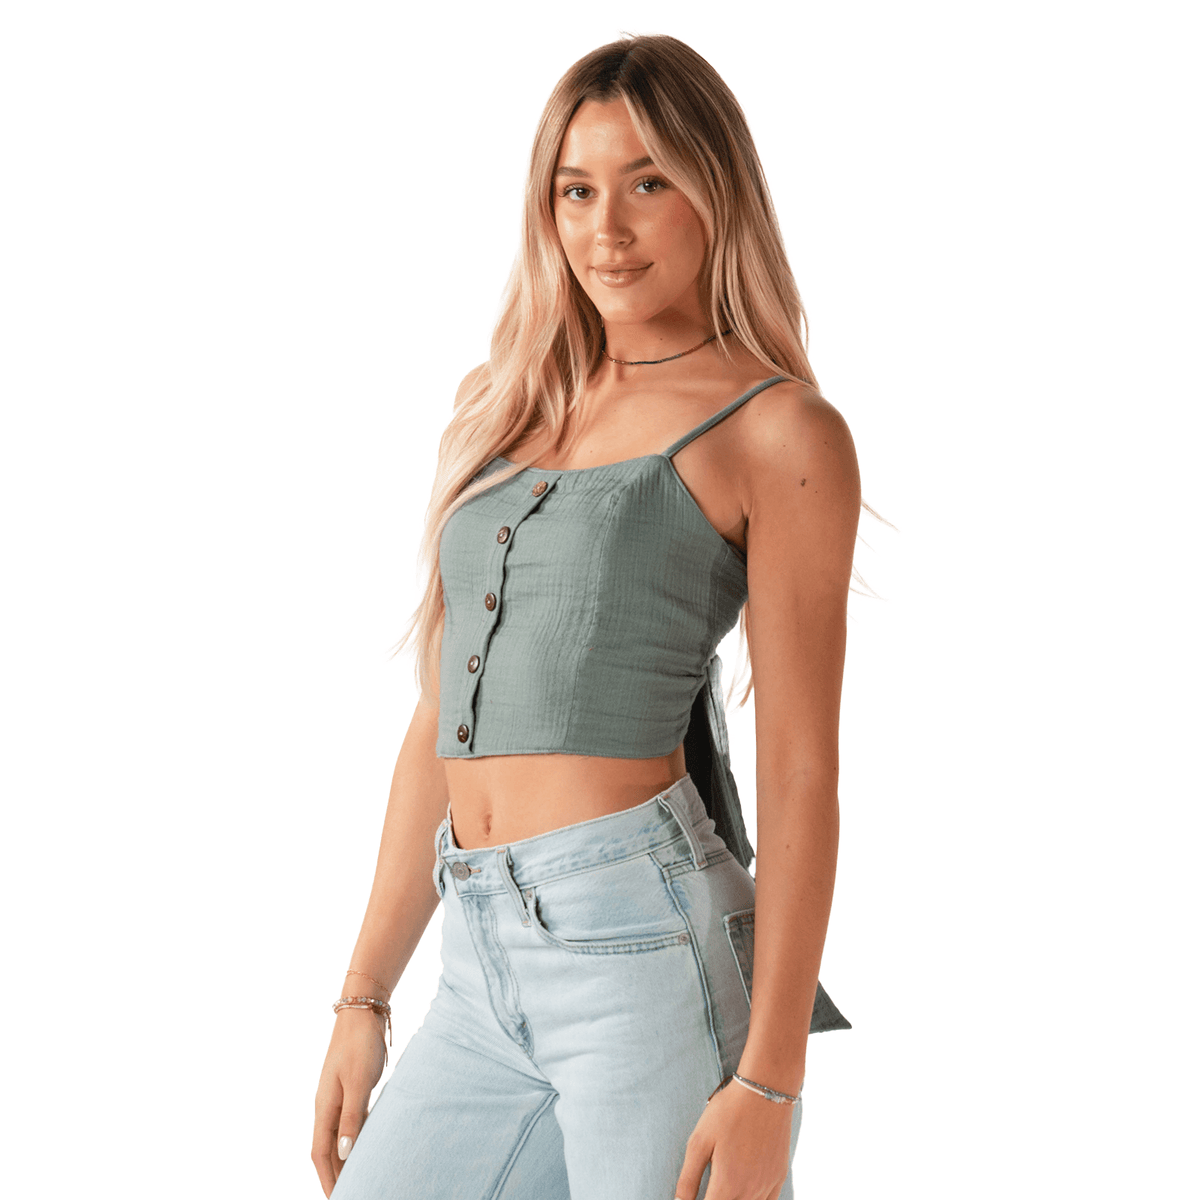 Model wearing sage colored tank top with front button detailing